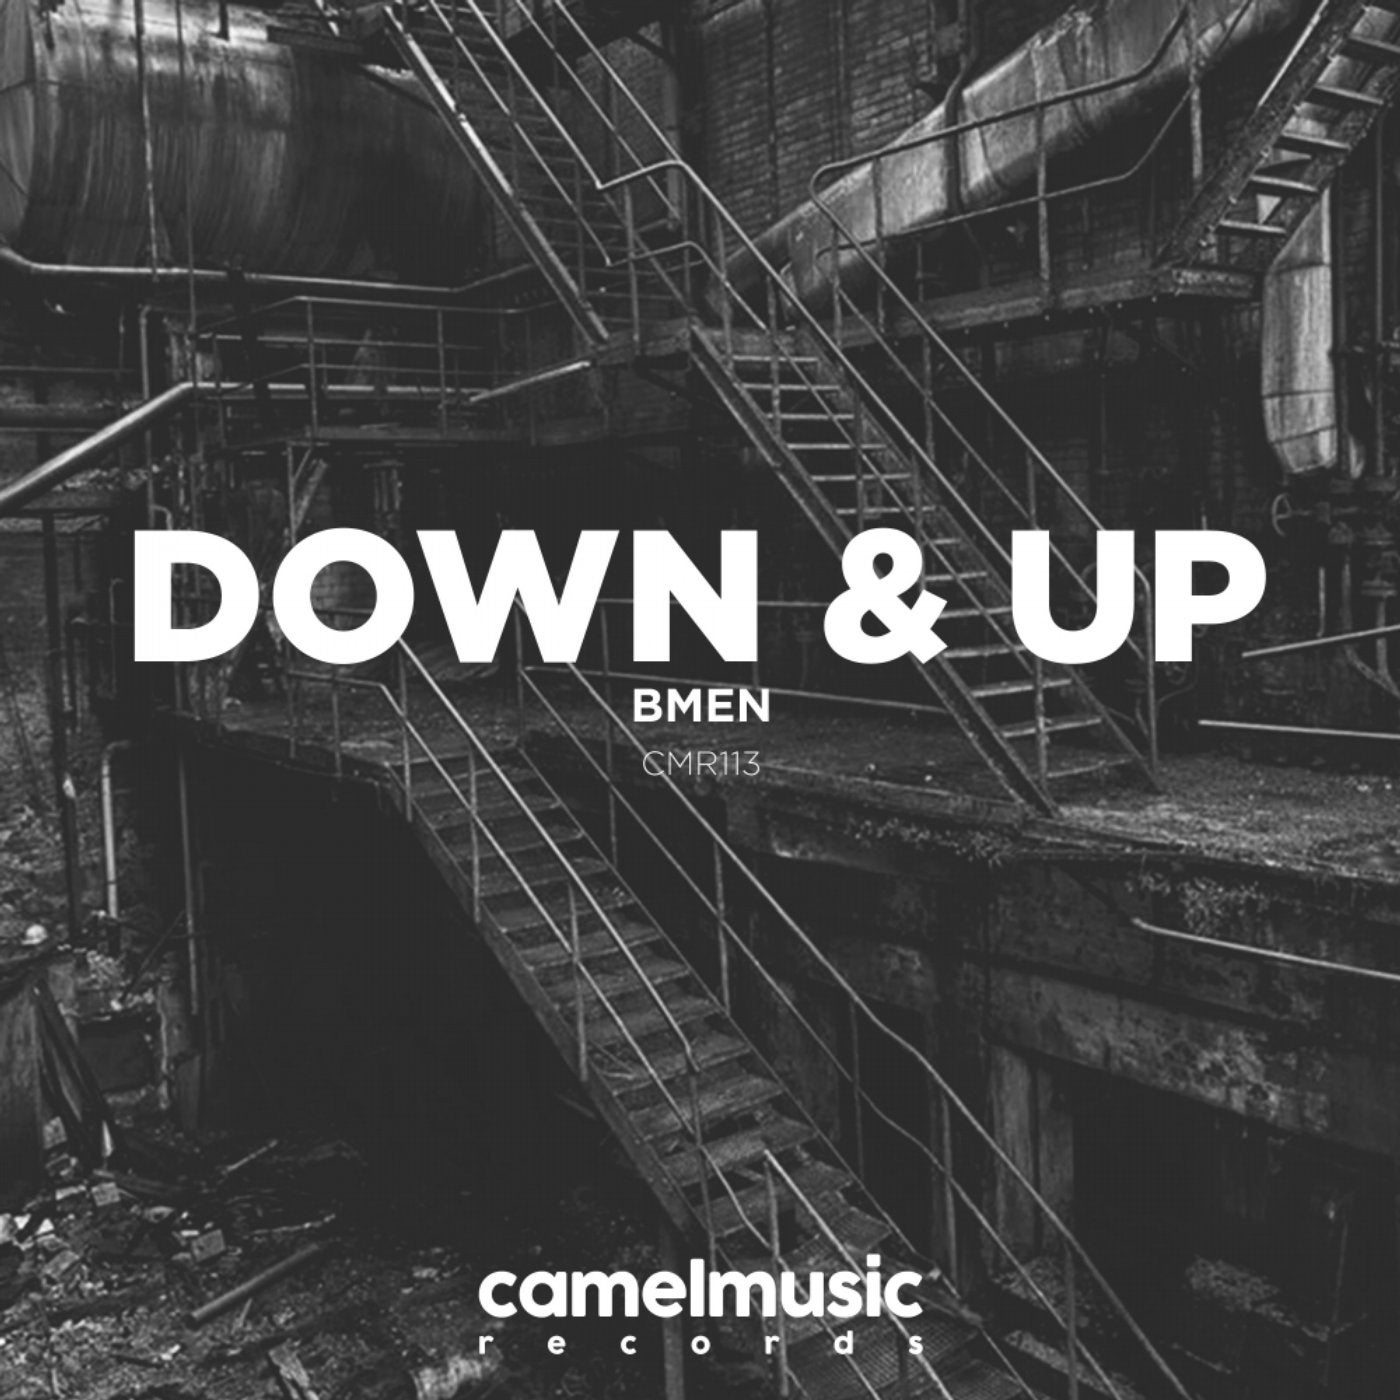 Down & Up